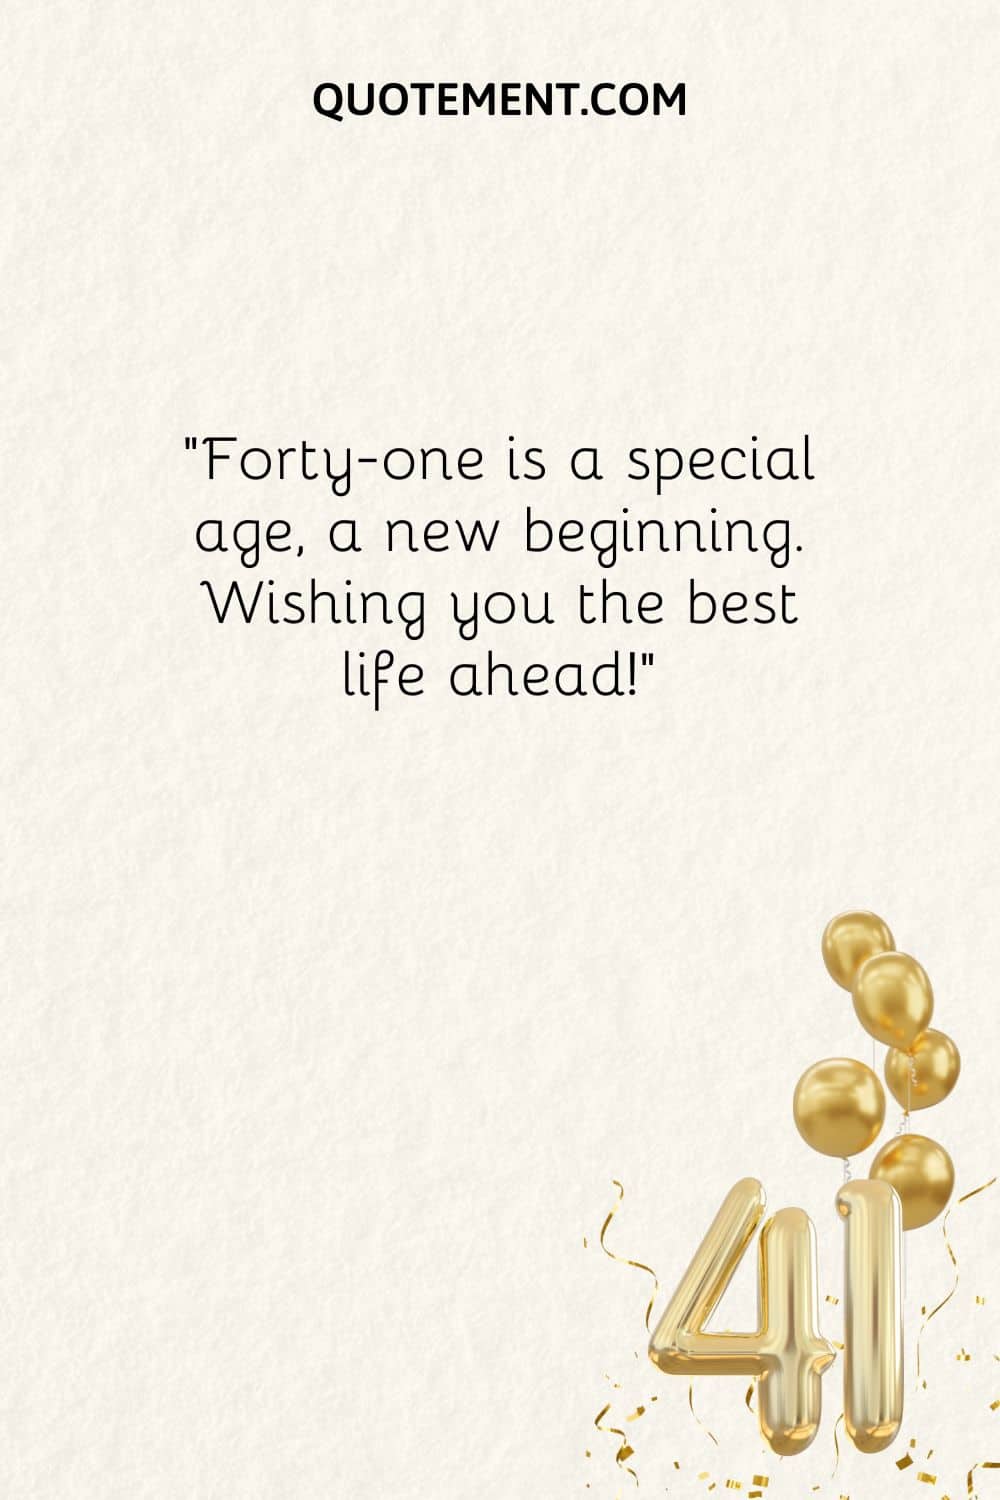 Forty-one is a special age, a new beginning. Wishing you the best life ahead